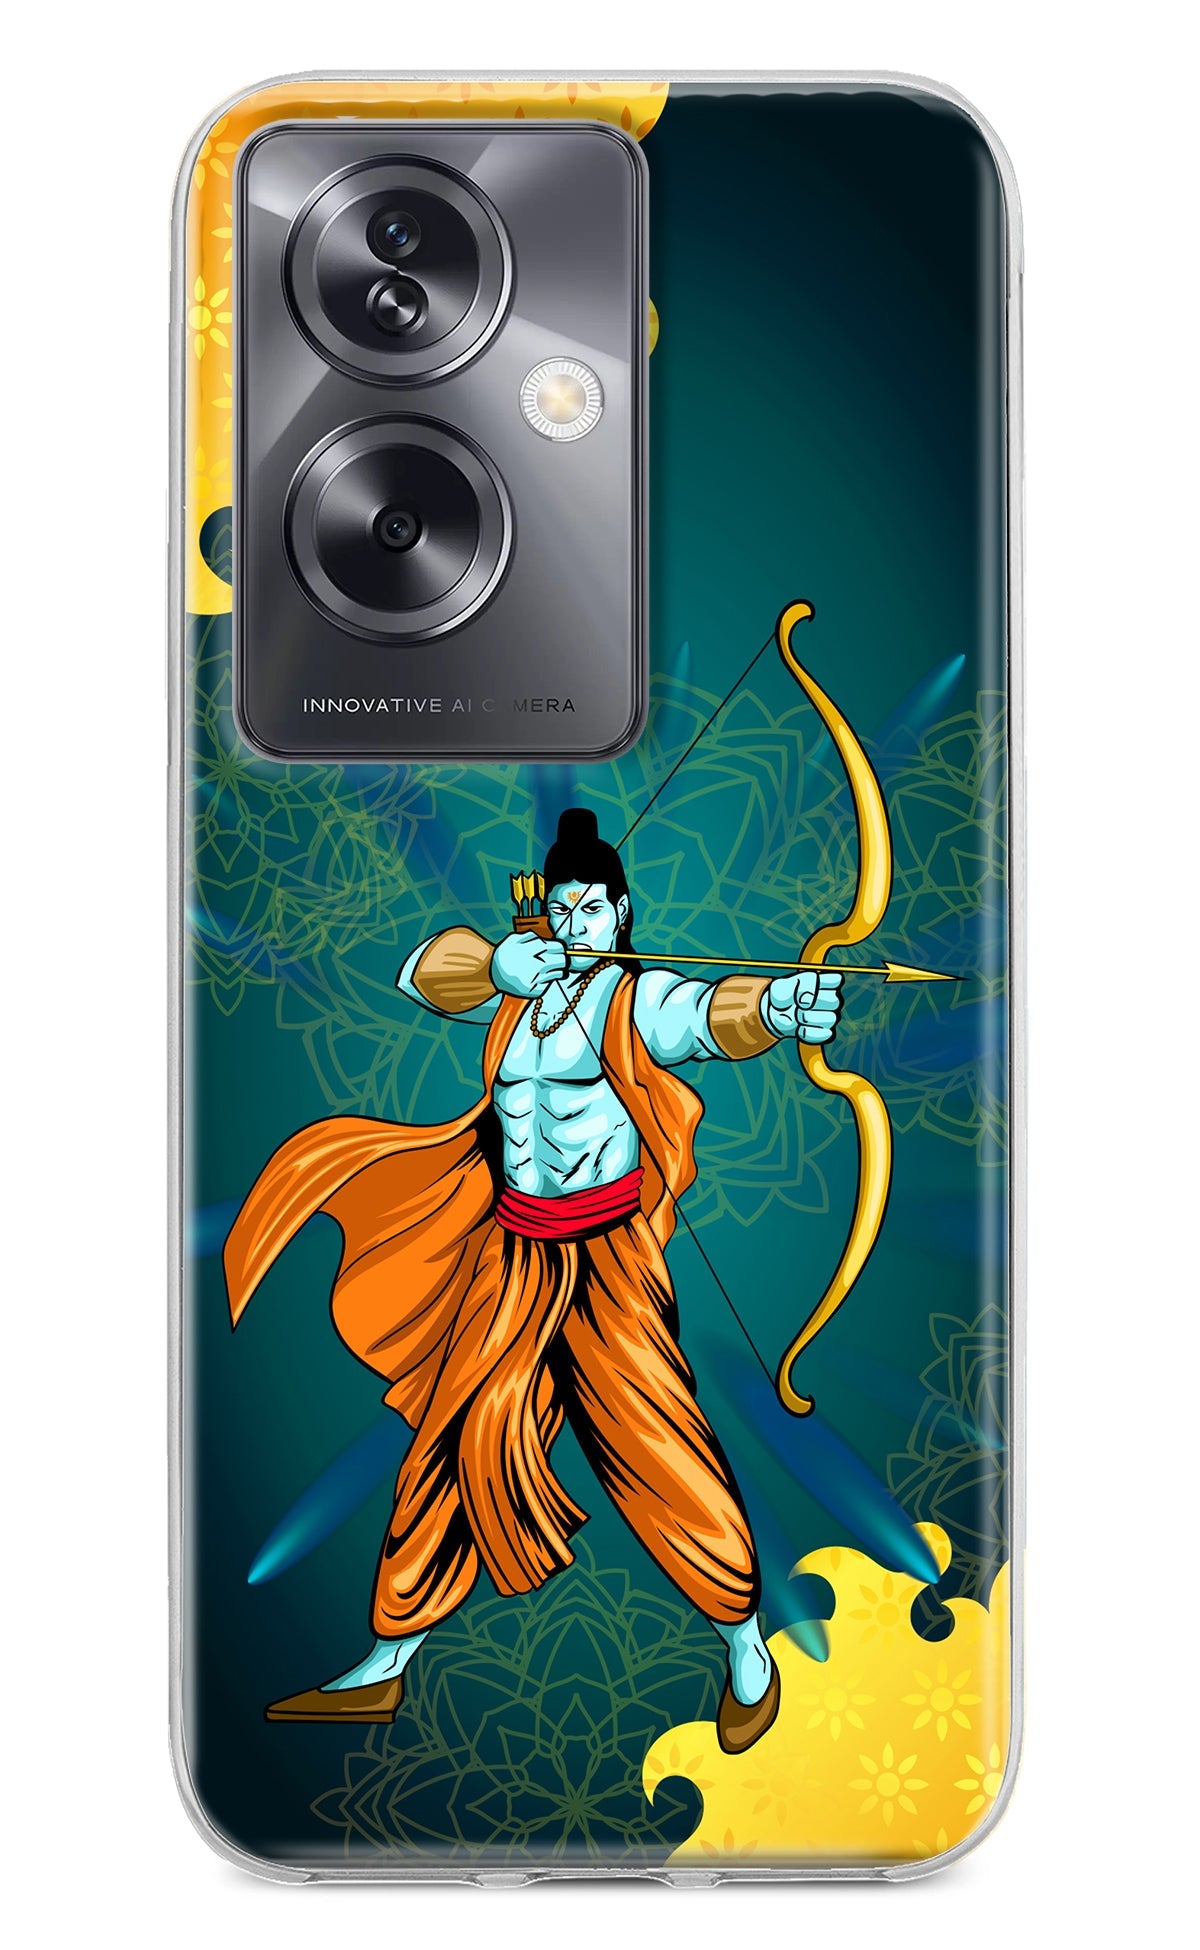 Lord Ram - 6 Oppo A79 5G Back Cover